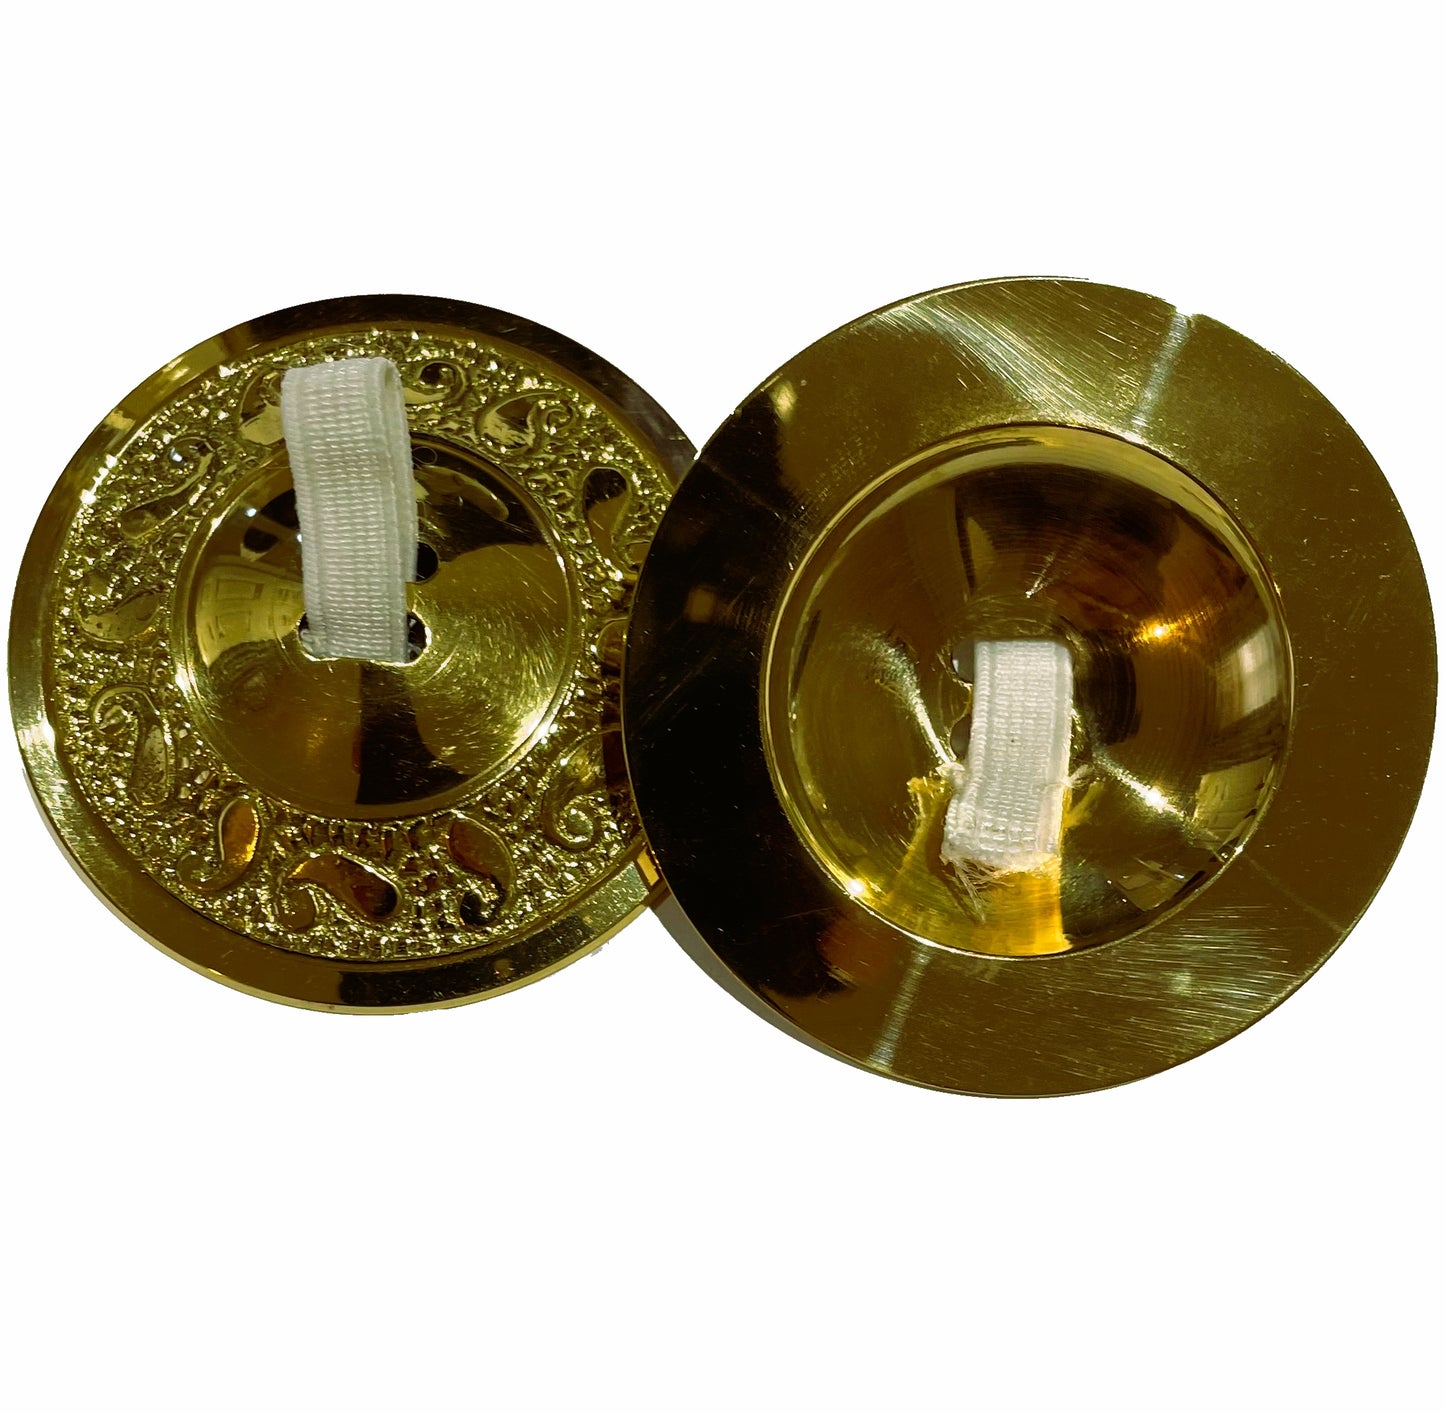 Paisley Design Brass Finger Cymbals-Two Slots-2.38"D